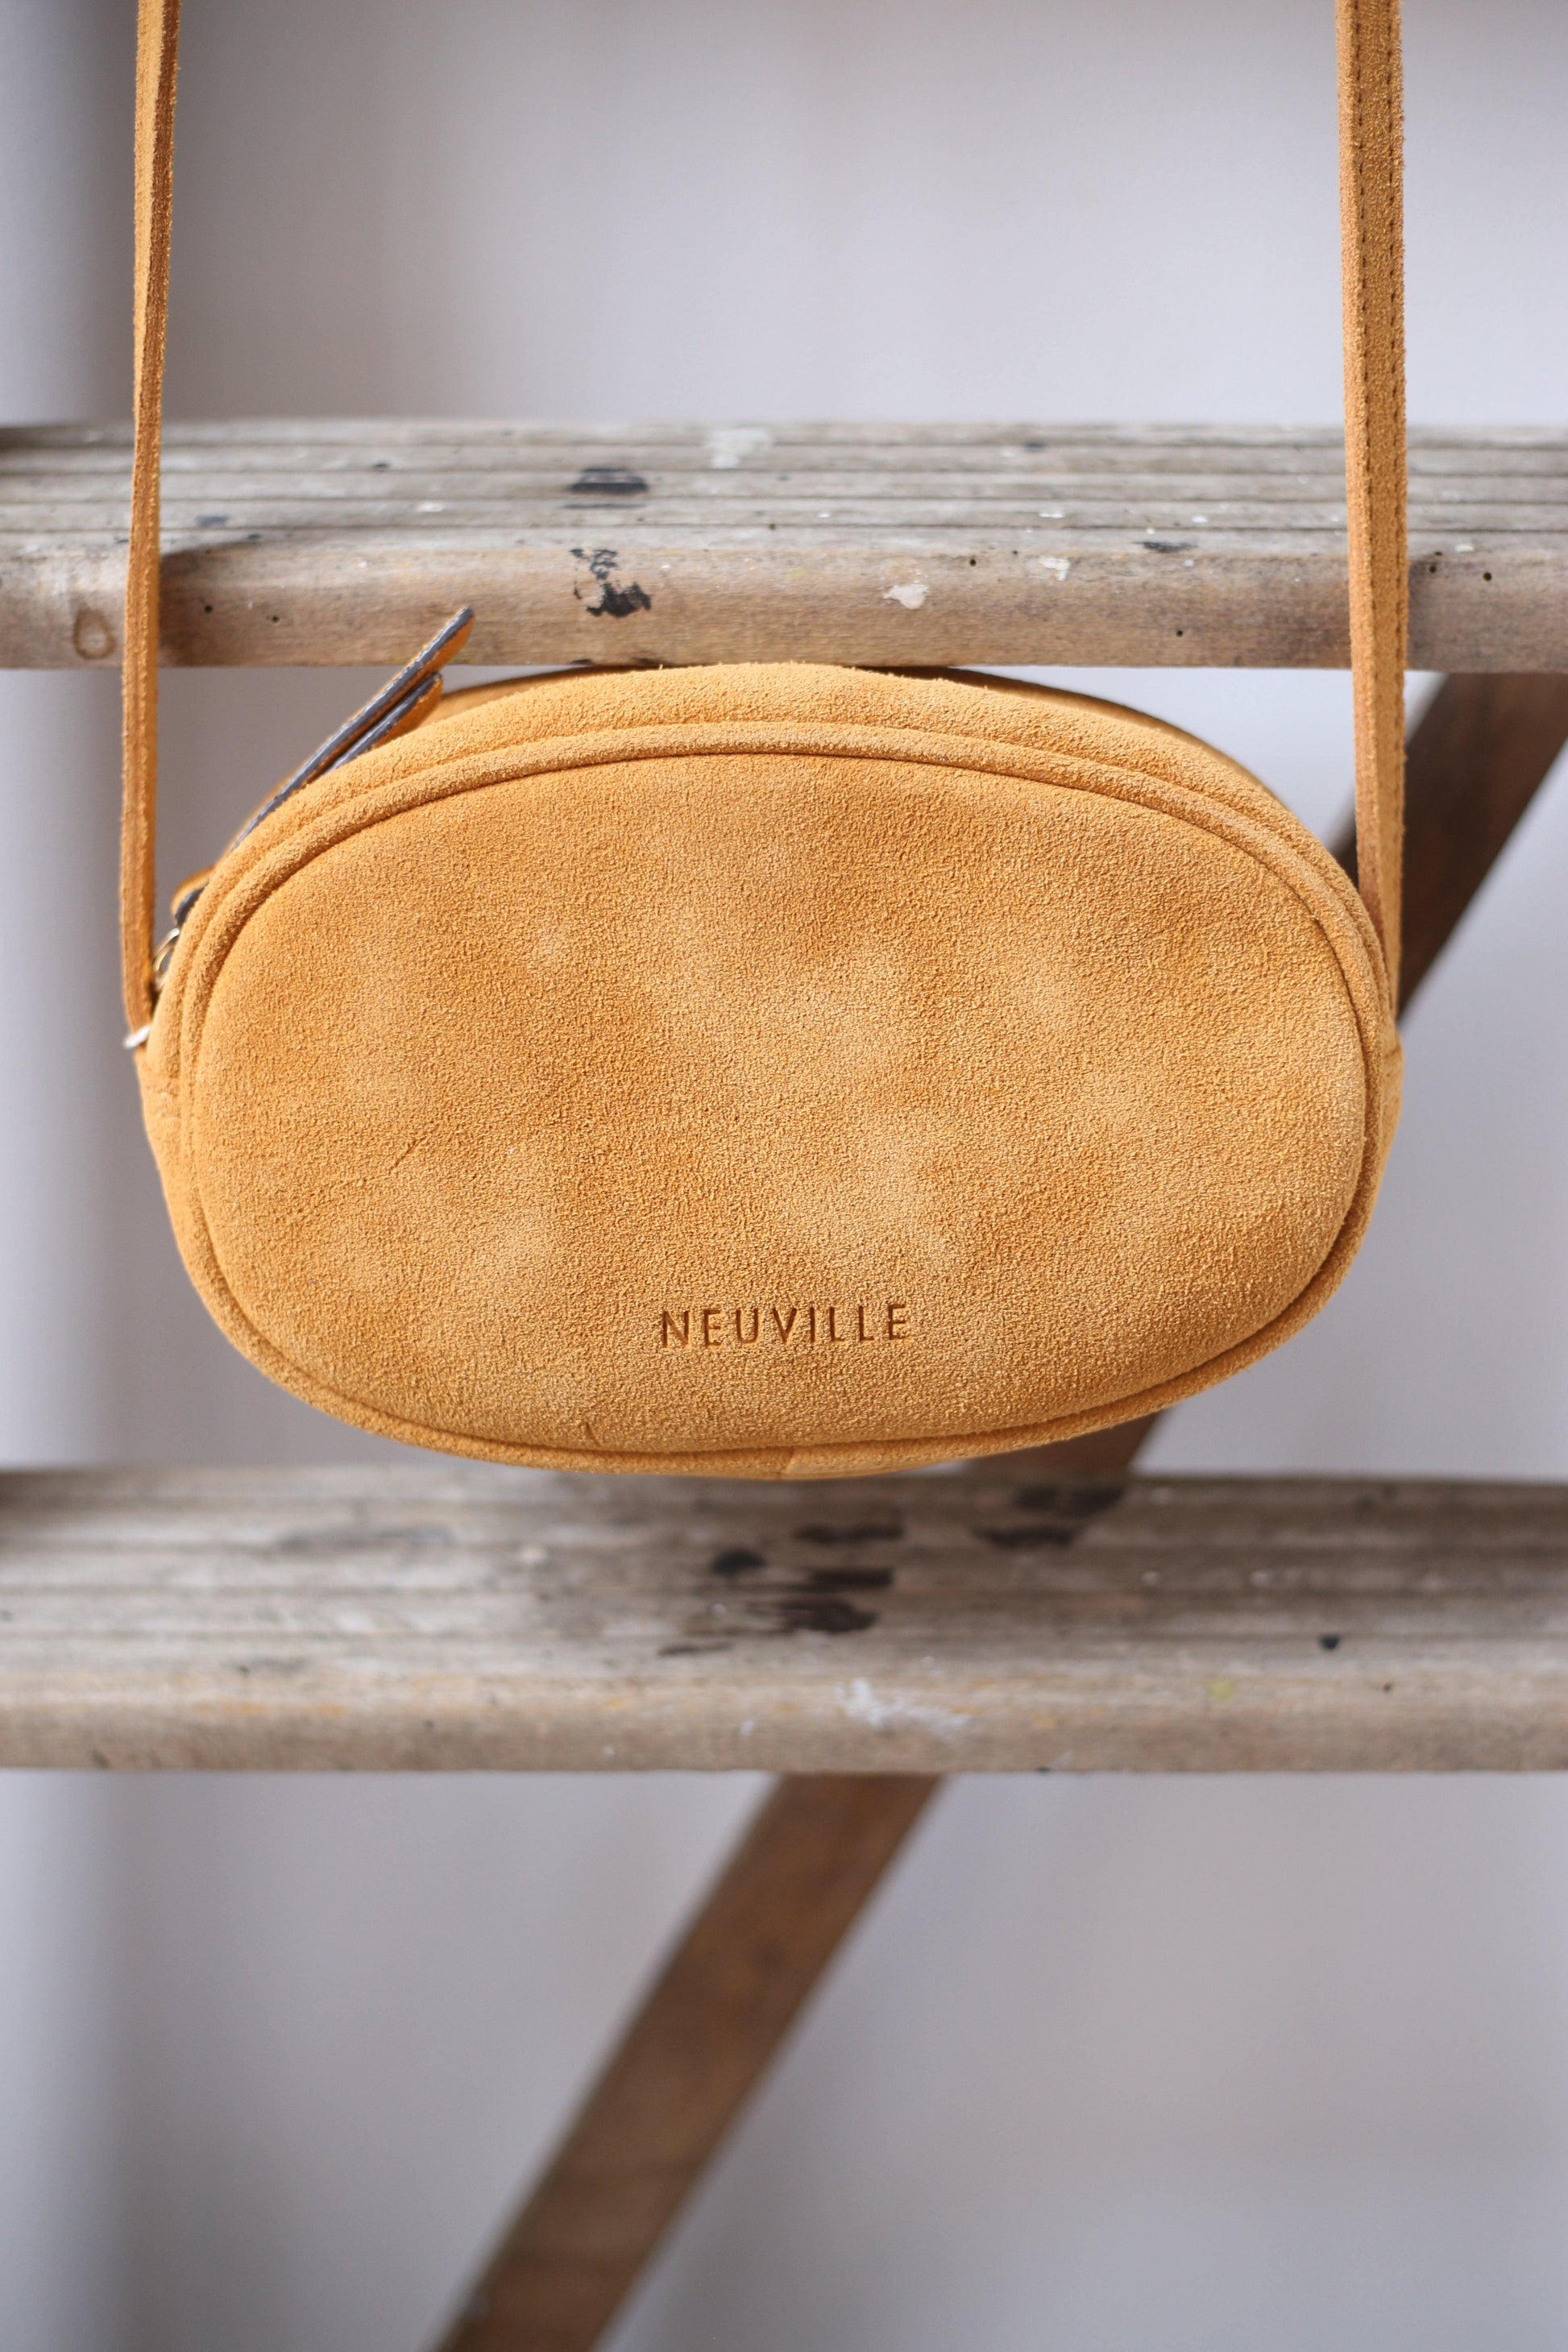 Neuville - Ovale Yellow Suede Cross Body Bag - 32 The Guild 